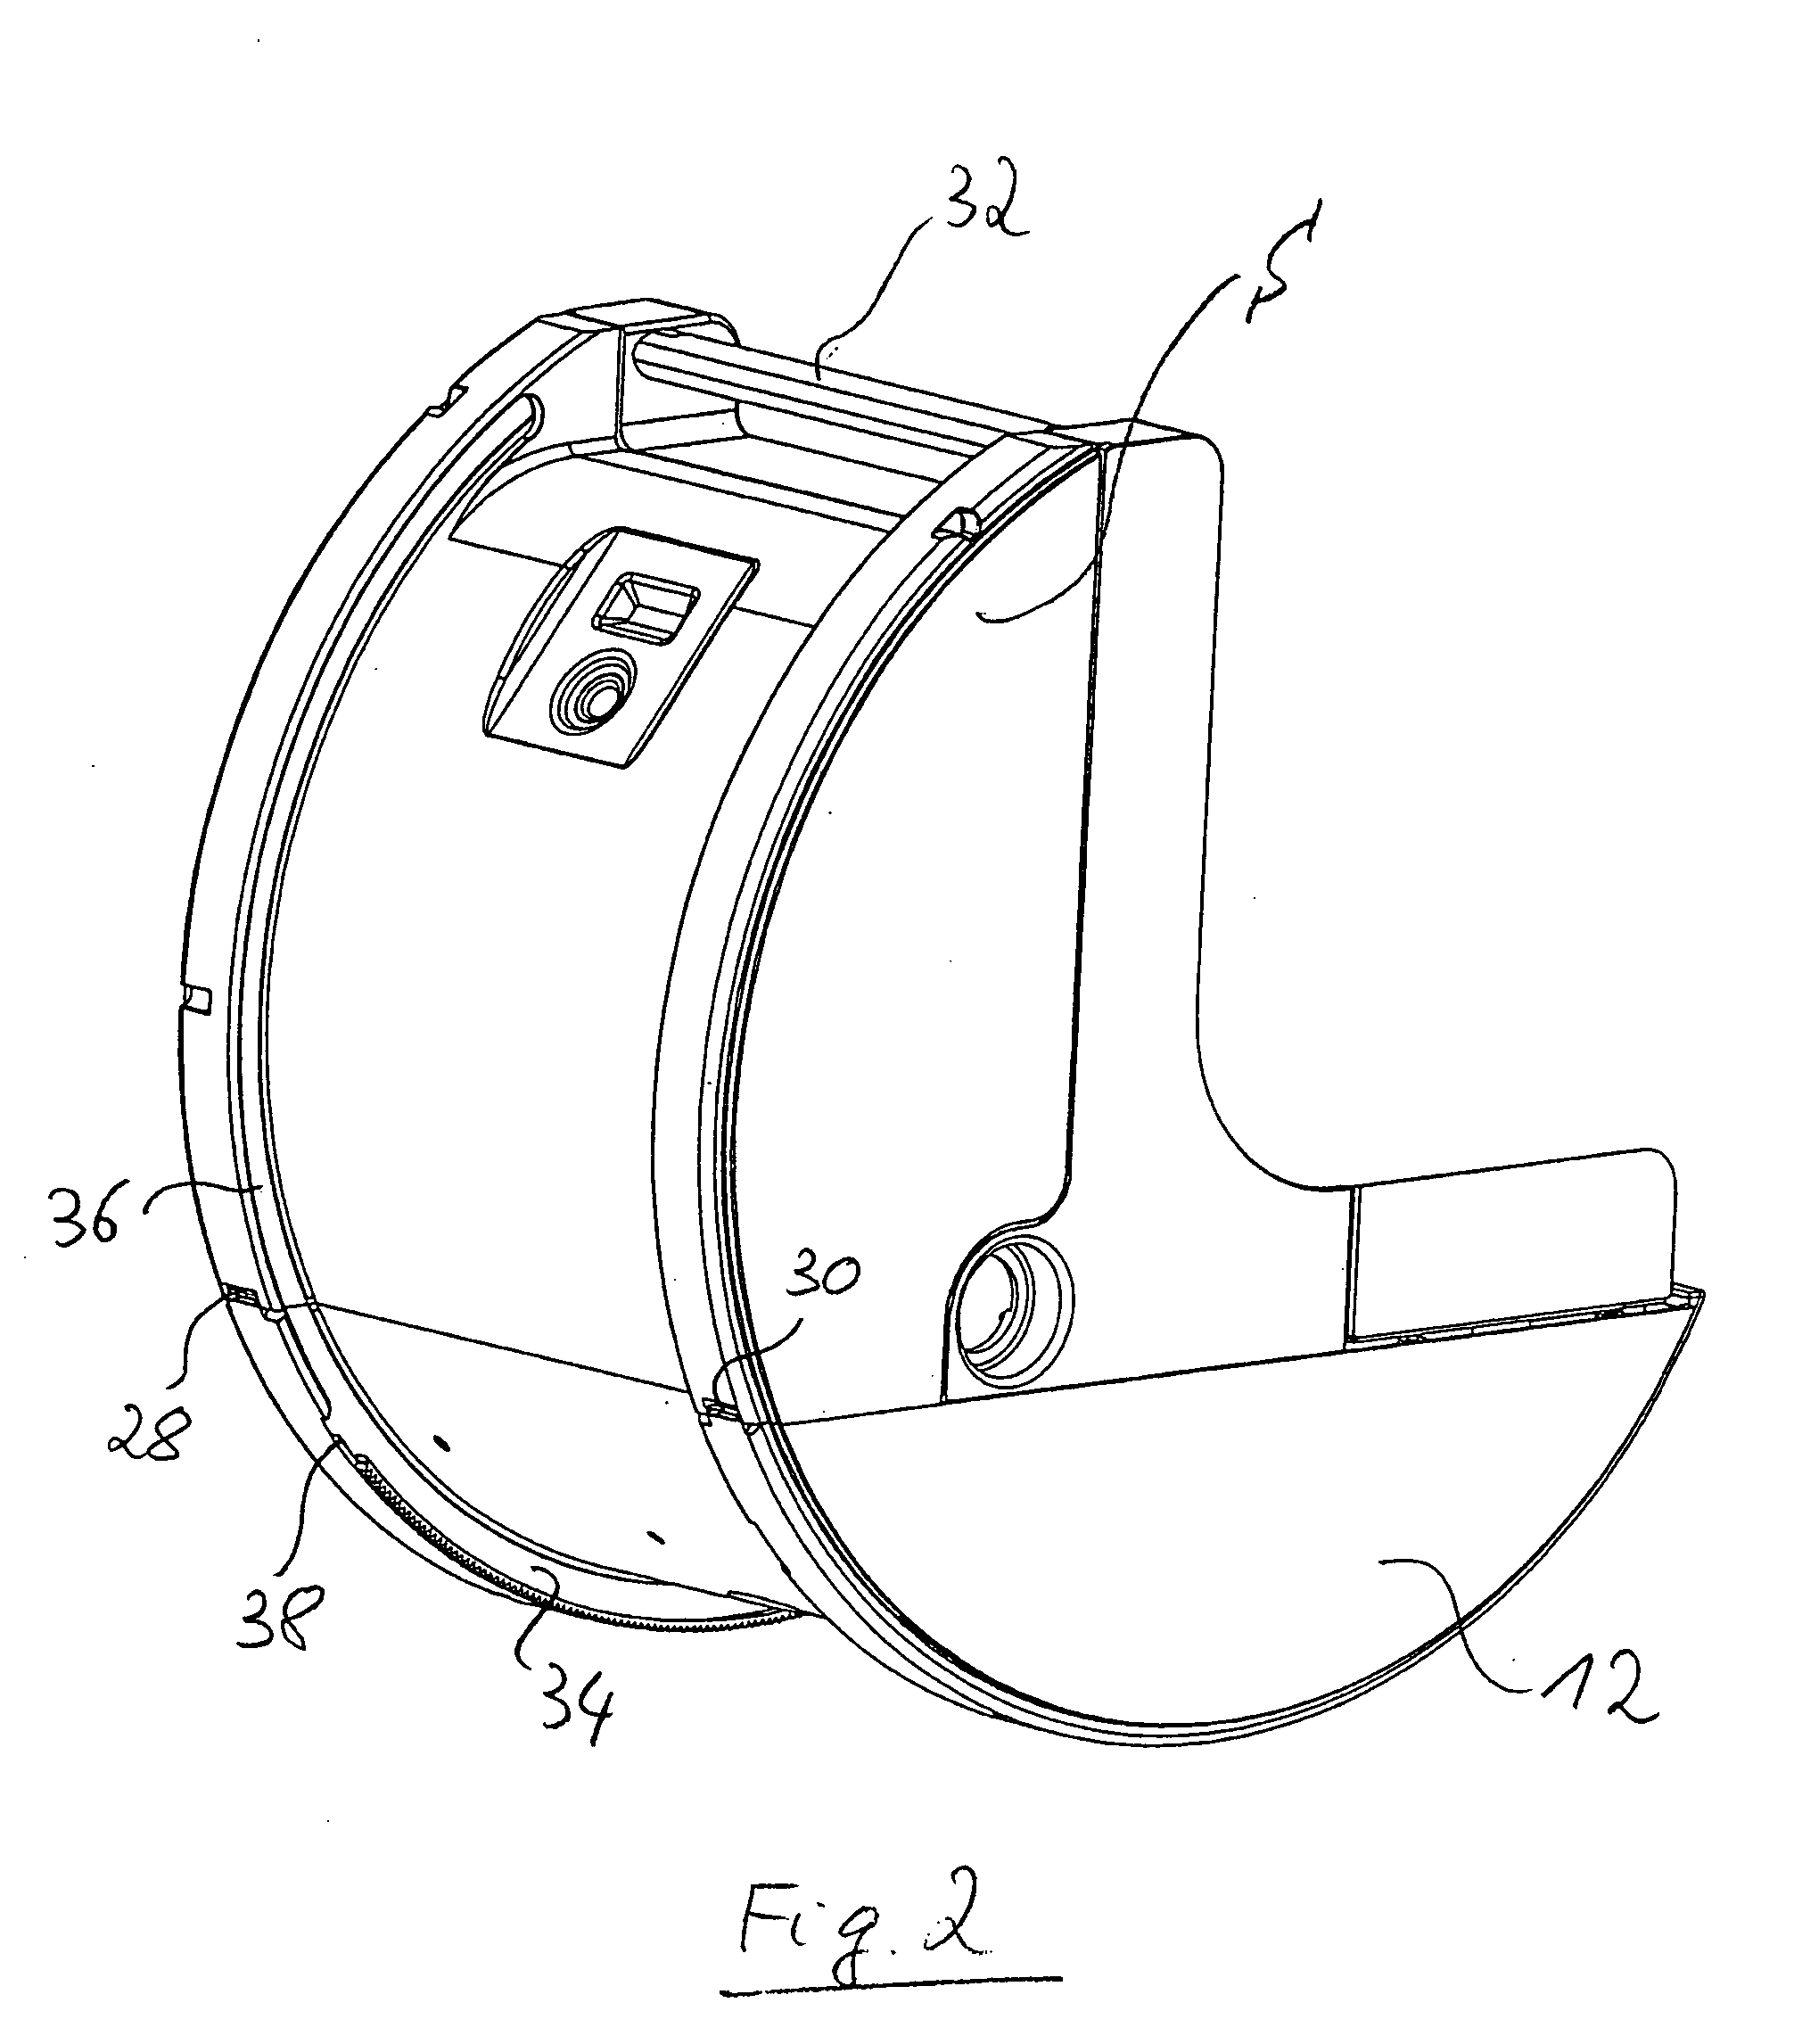 Apparatus for making extracorporeal blood circulation available